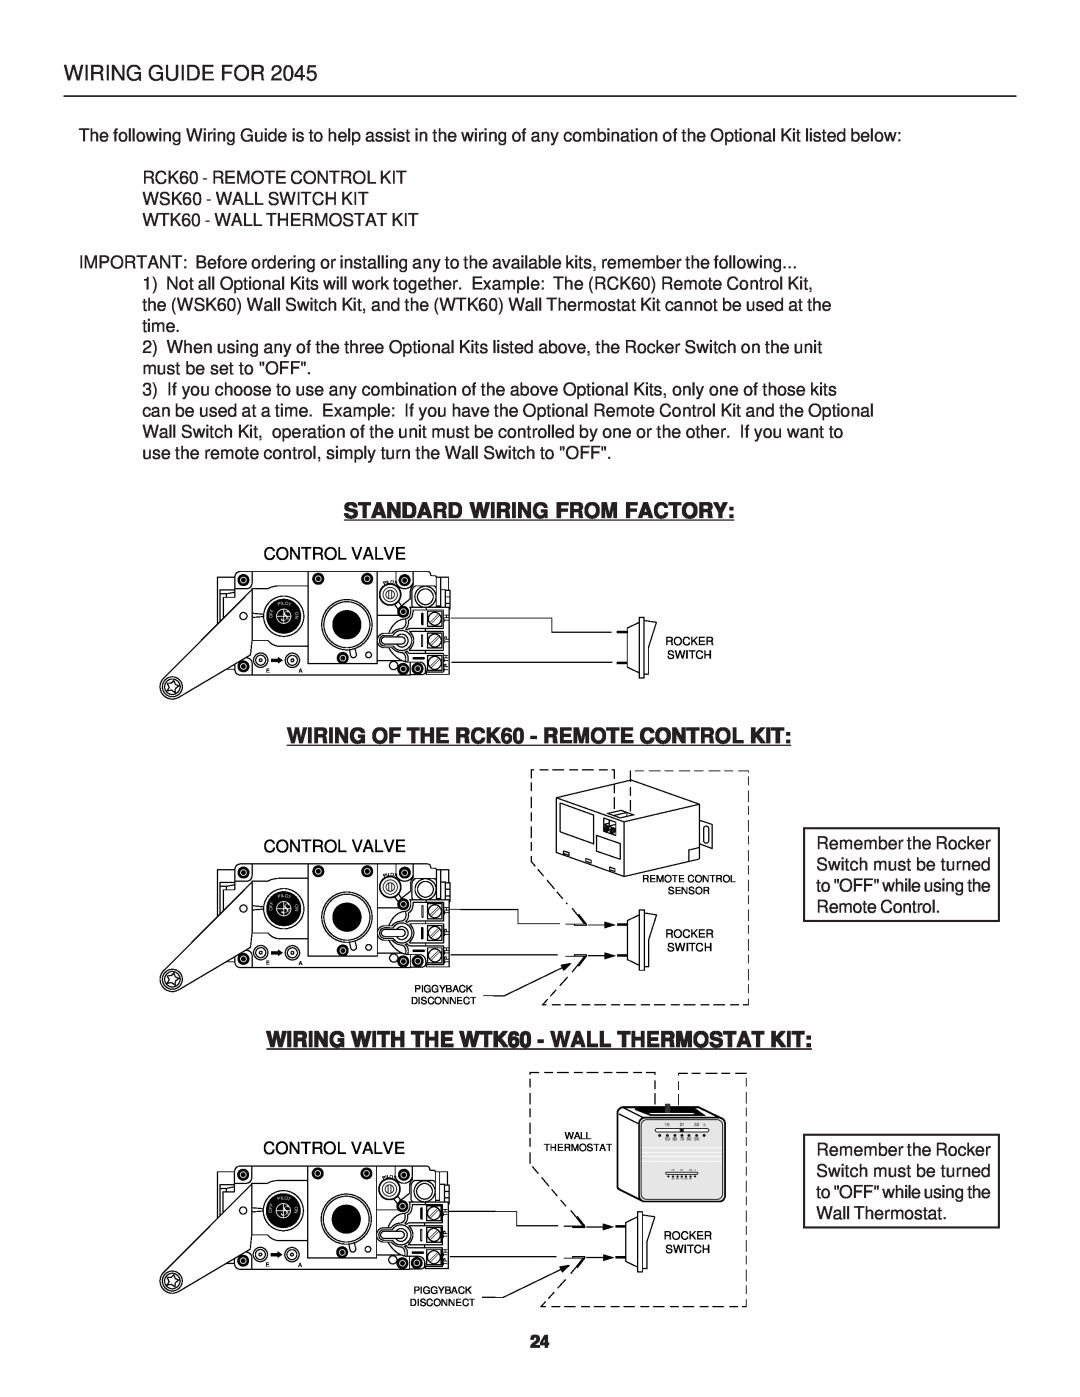 United States Stove B2045L manual Wiring Guide For, Standard Wiring From Factory, WIRING OF THE RCK60 - REMOTE CONTROL KIT 